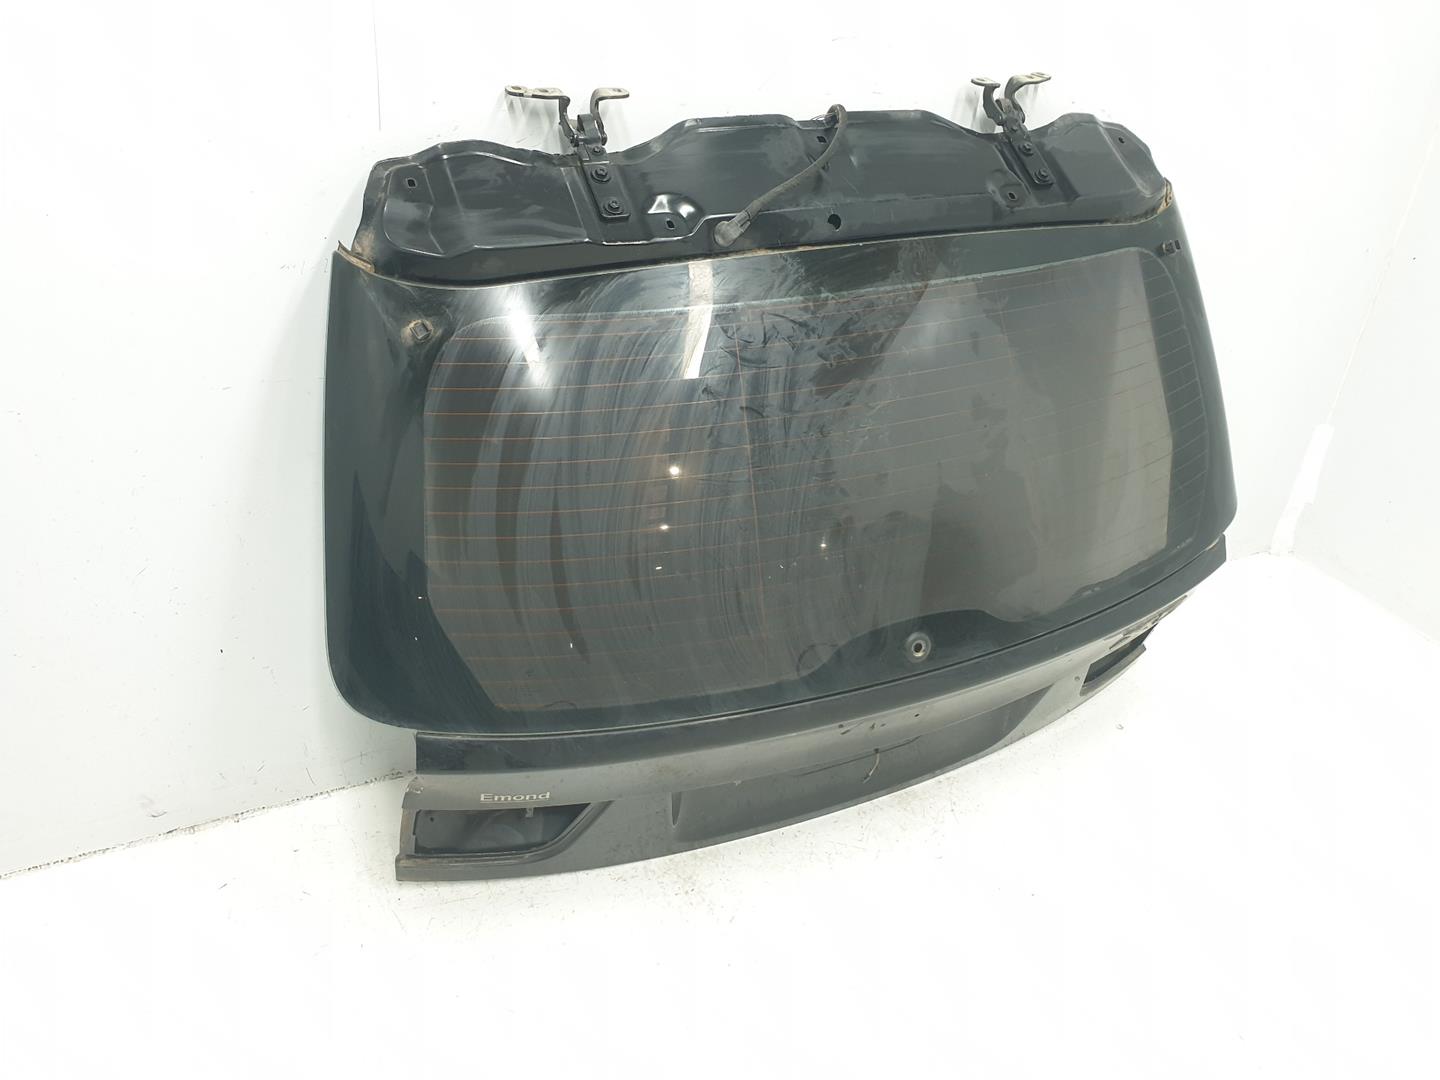 BMW X5 E70 (2006-2013) Bootlid Rear Boot 41627262544 24240409